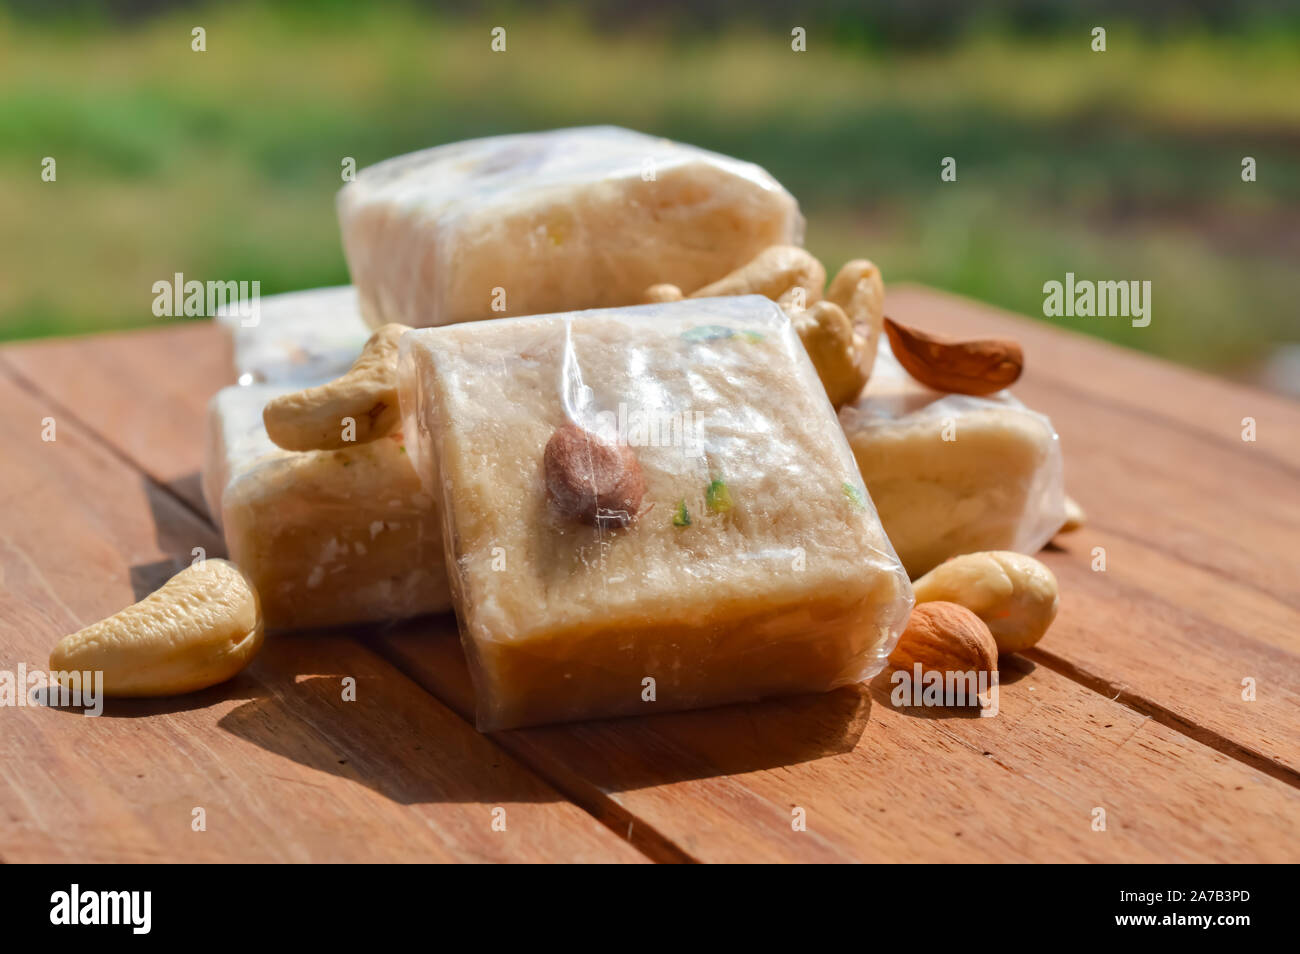 Patisa / Soan Papdi is a popular Indian cube shape flakey/crispy dessert.sonpapdi and nuts on wooden table Stock Photo